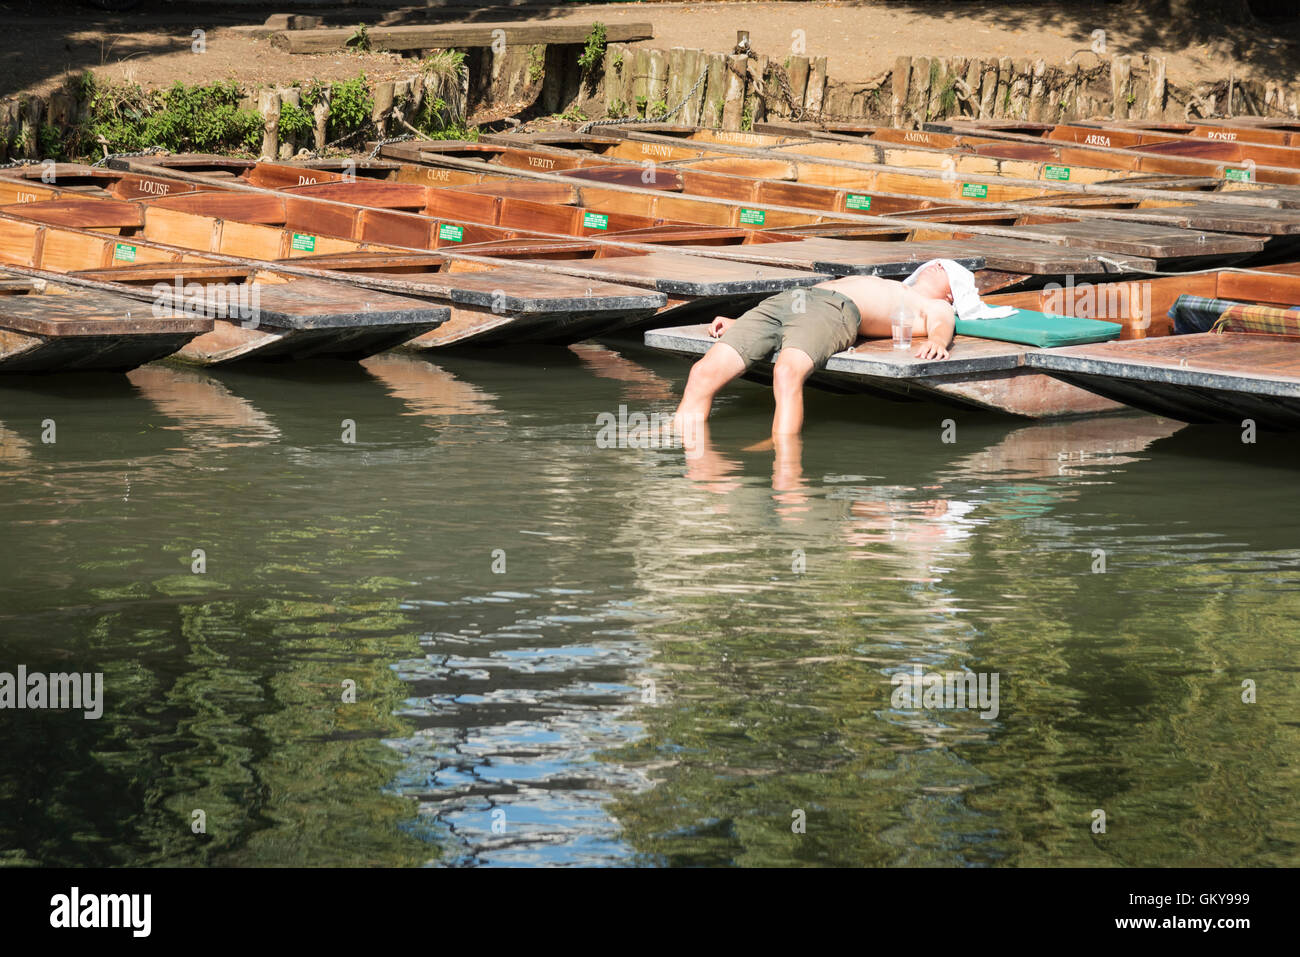 River Cam, Cambridge, UK. 24th August 2016. A punt hire chauffeur takes a break in the sun before the crowds of tourists arrive. The heatwave brought temperatures of over 30 degrees centigrade to the city. Hot weather is forecast across the south east of England today. Credit: Julian Eales/Alamy Live News Stock Photo